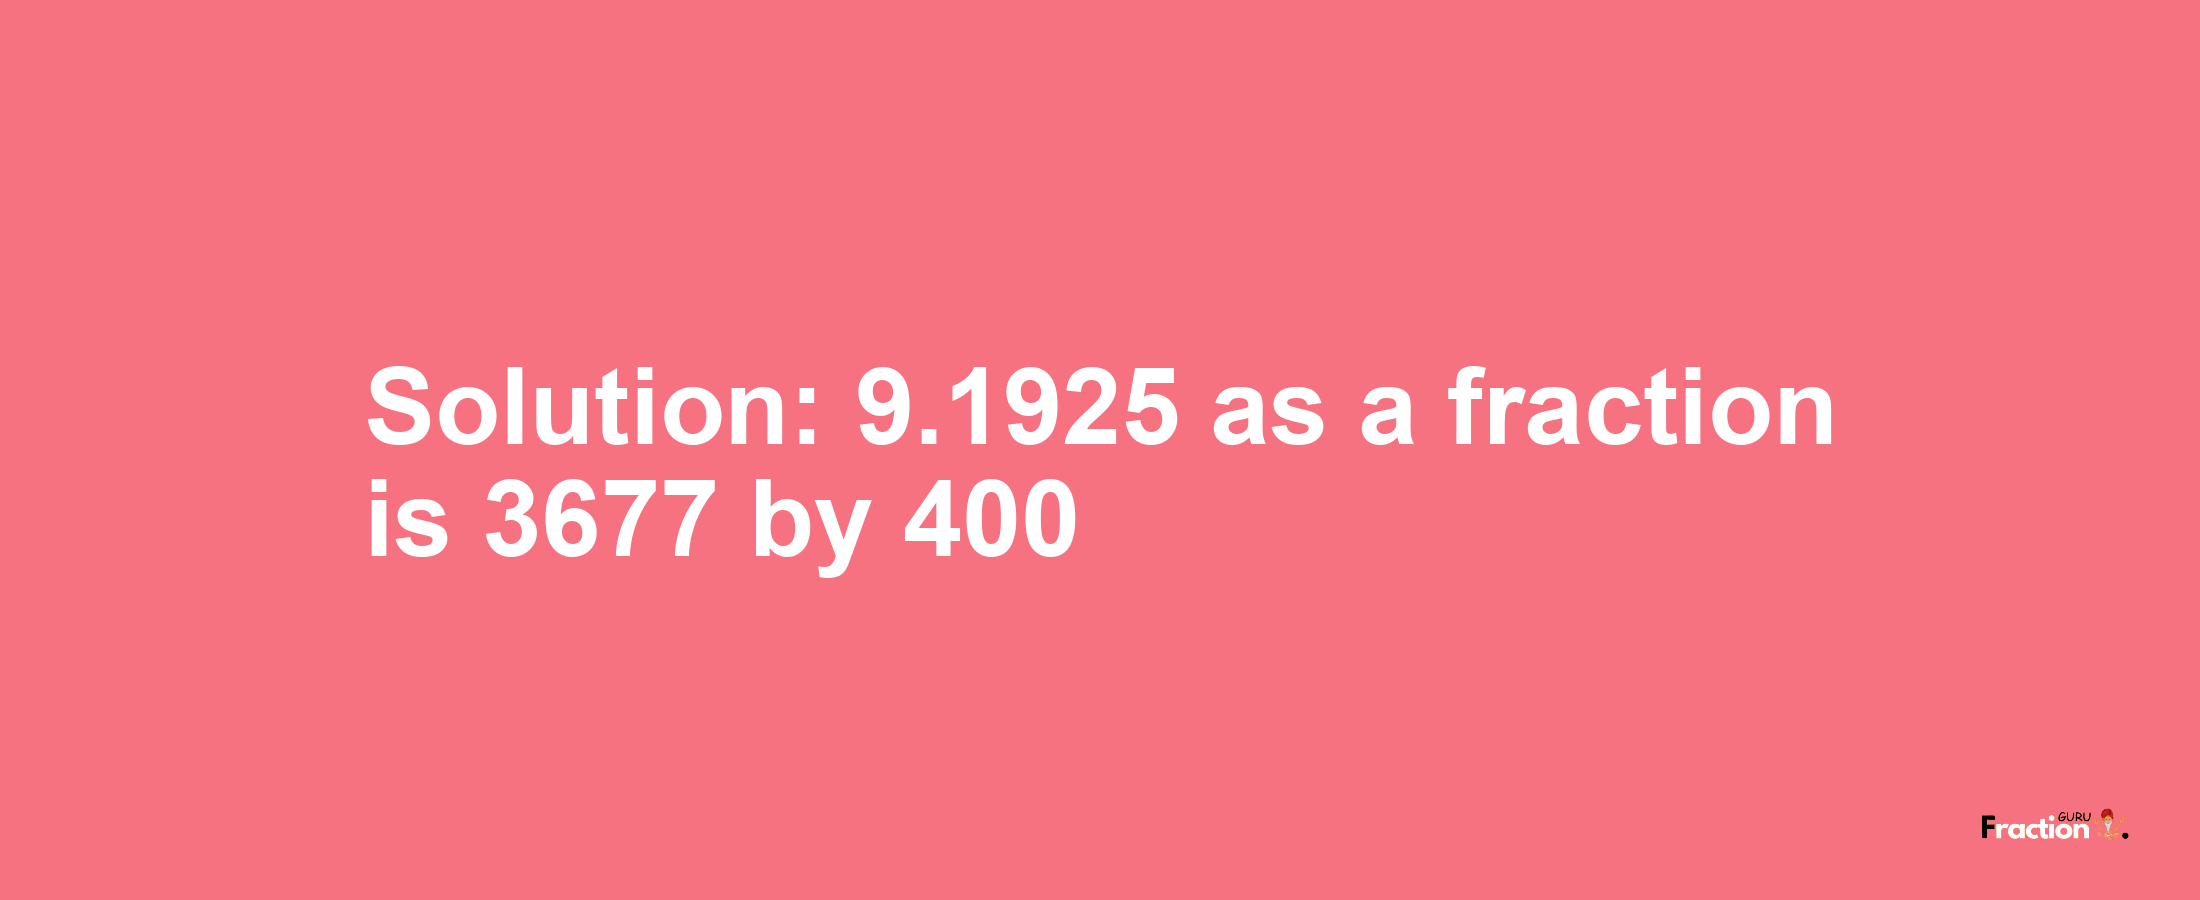 Solution:9.1925 as a fraction is 3677/400